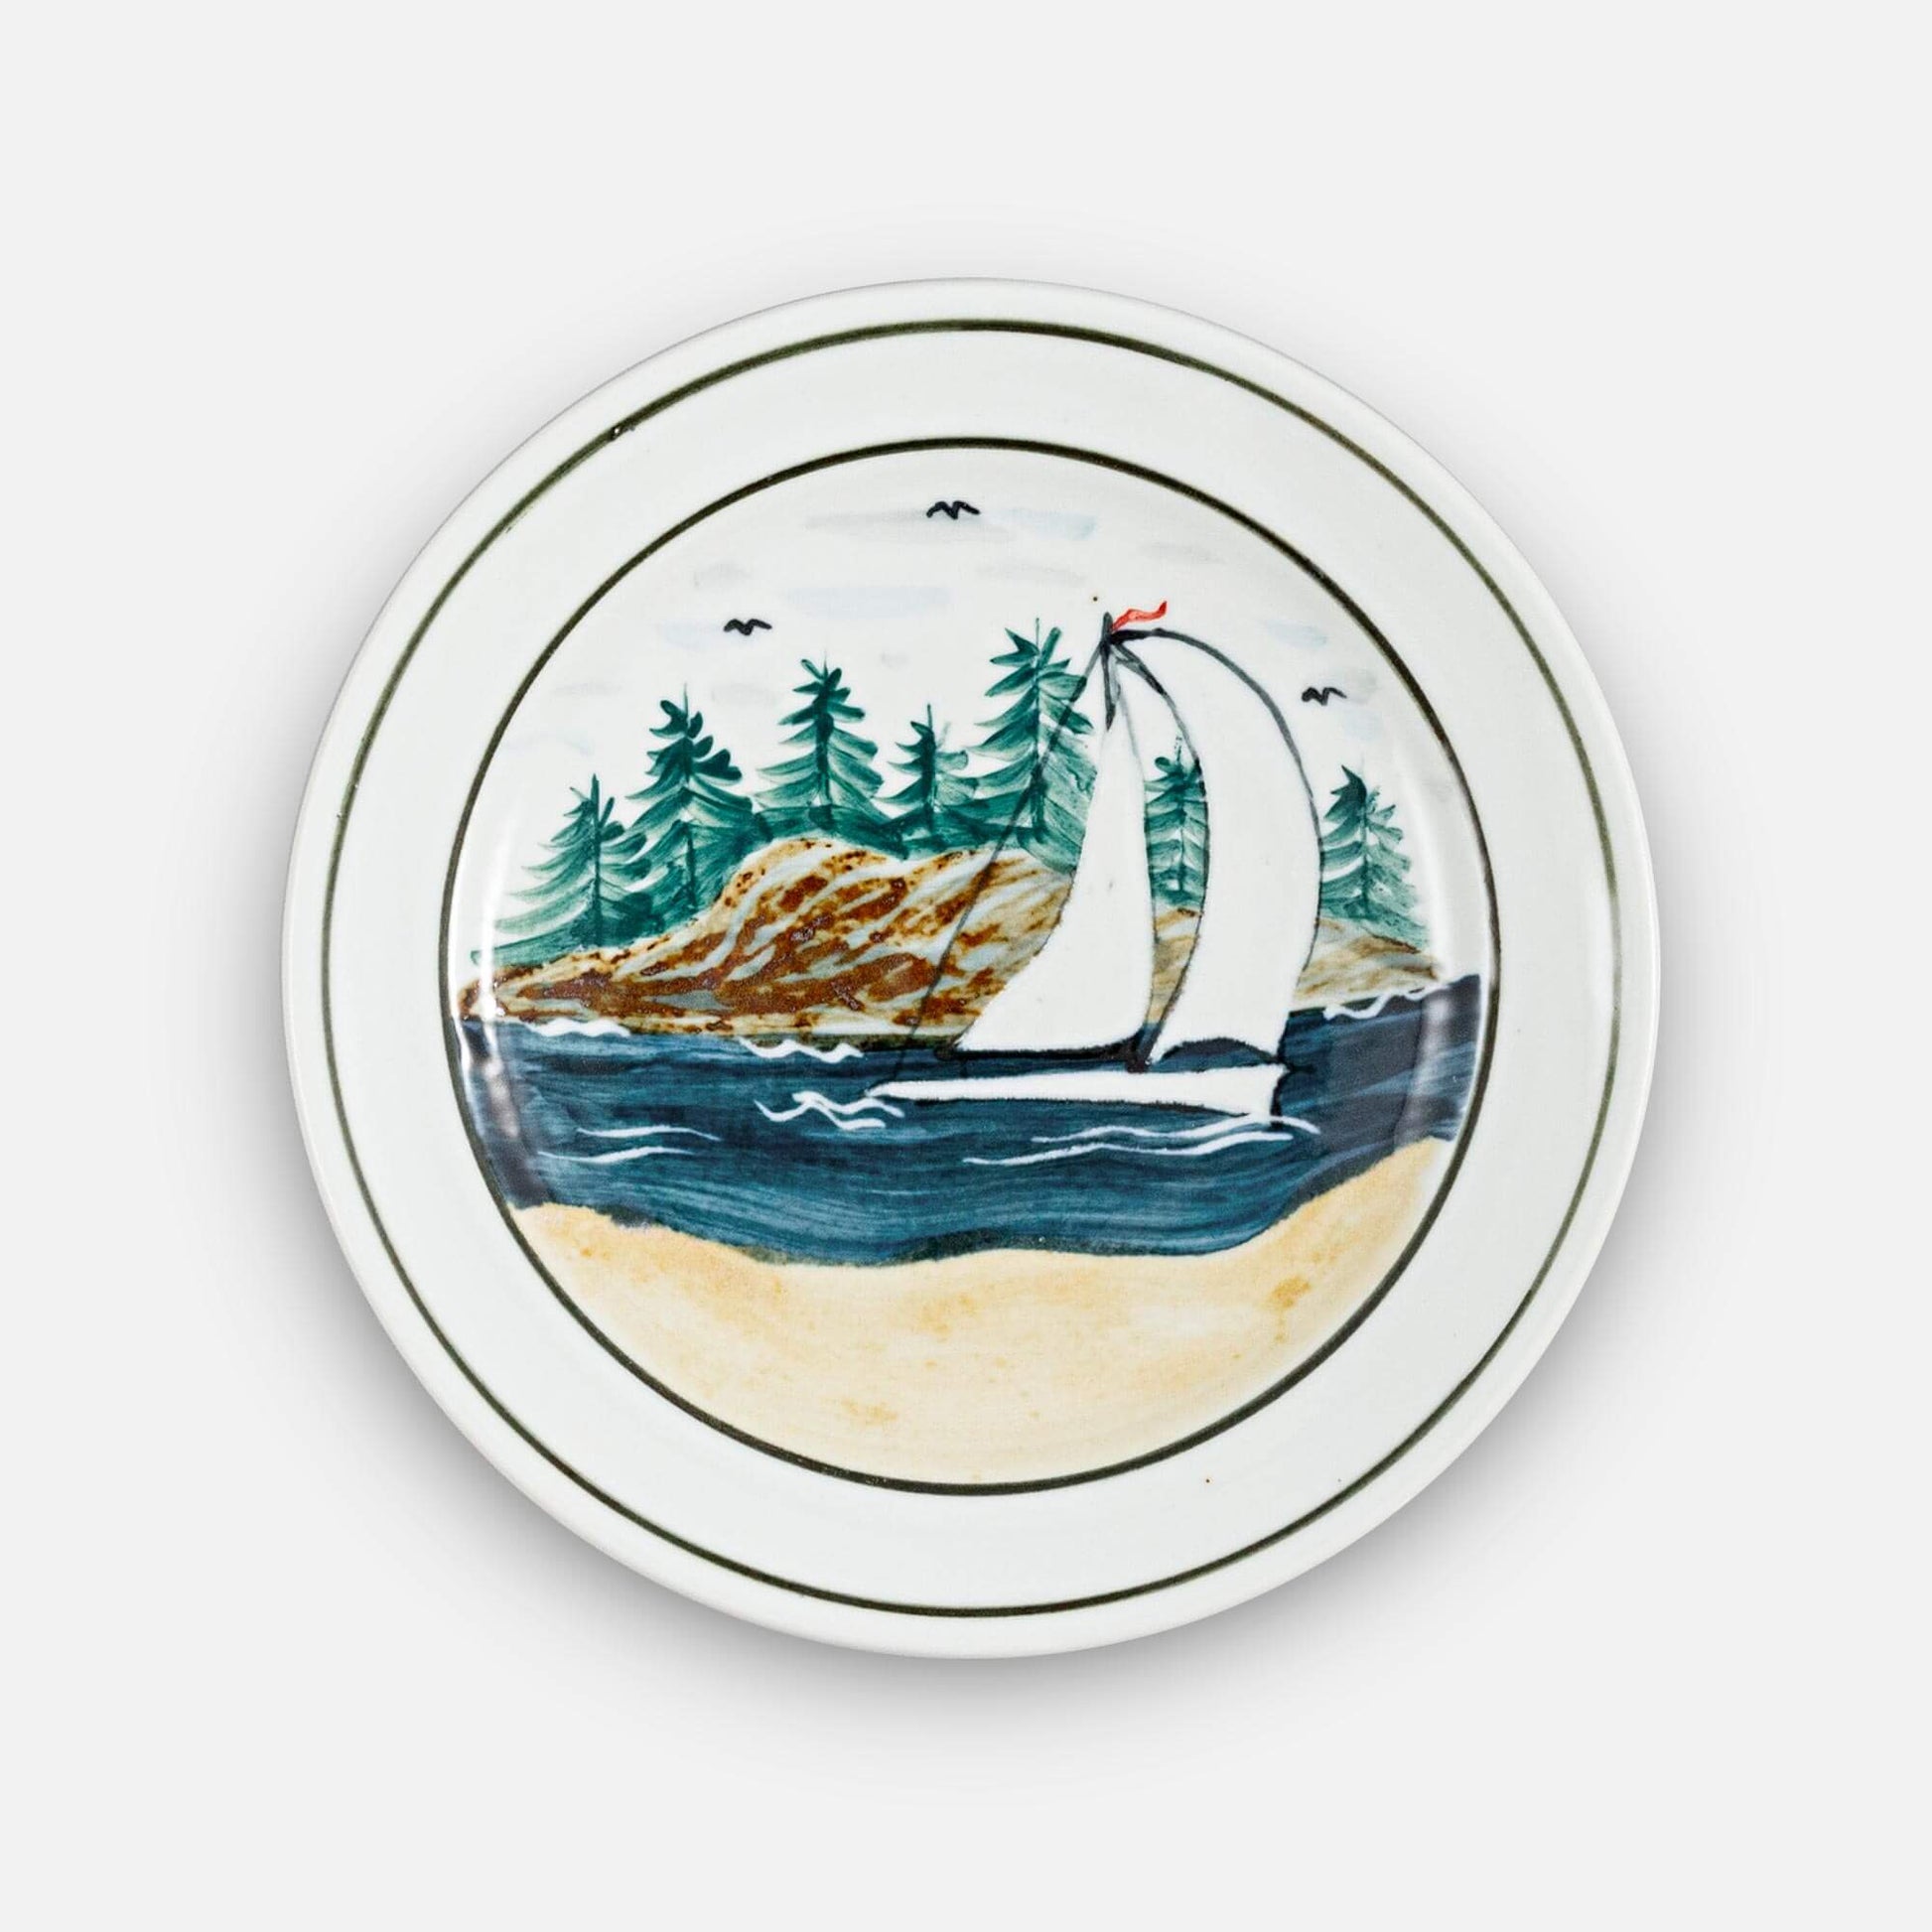 Handmade Pottery Classic Dinner Plate in Sailboat pattern made by Georgetown Pottery in Maine